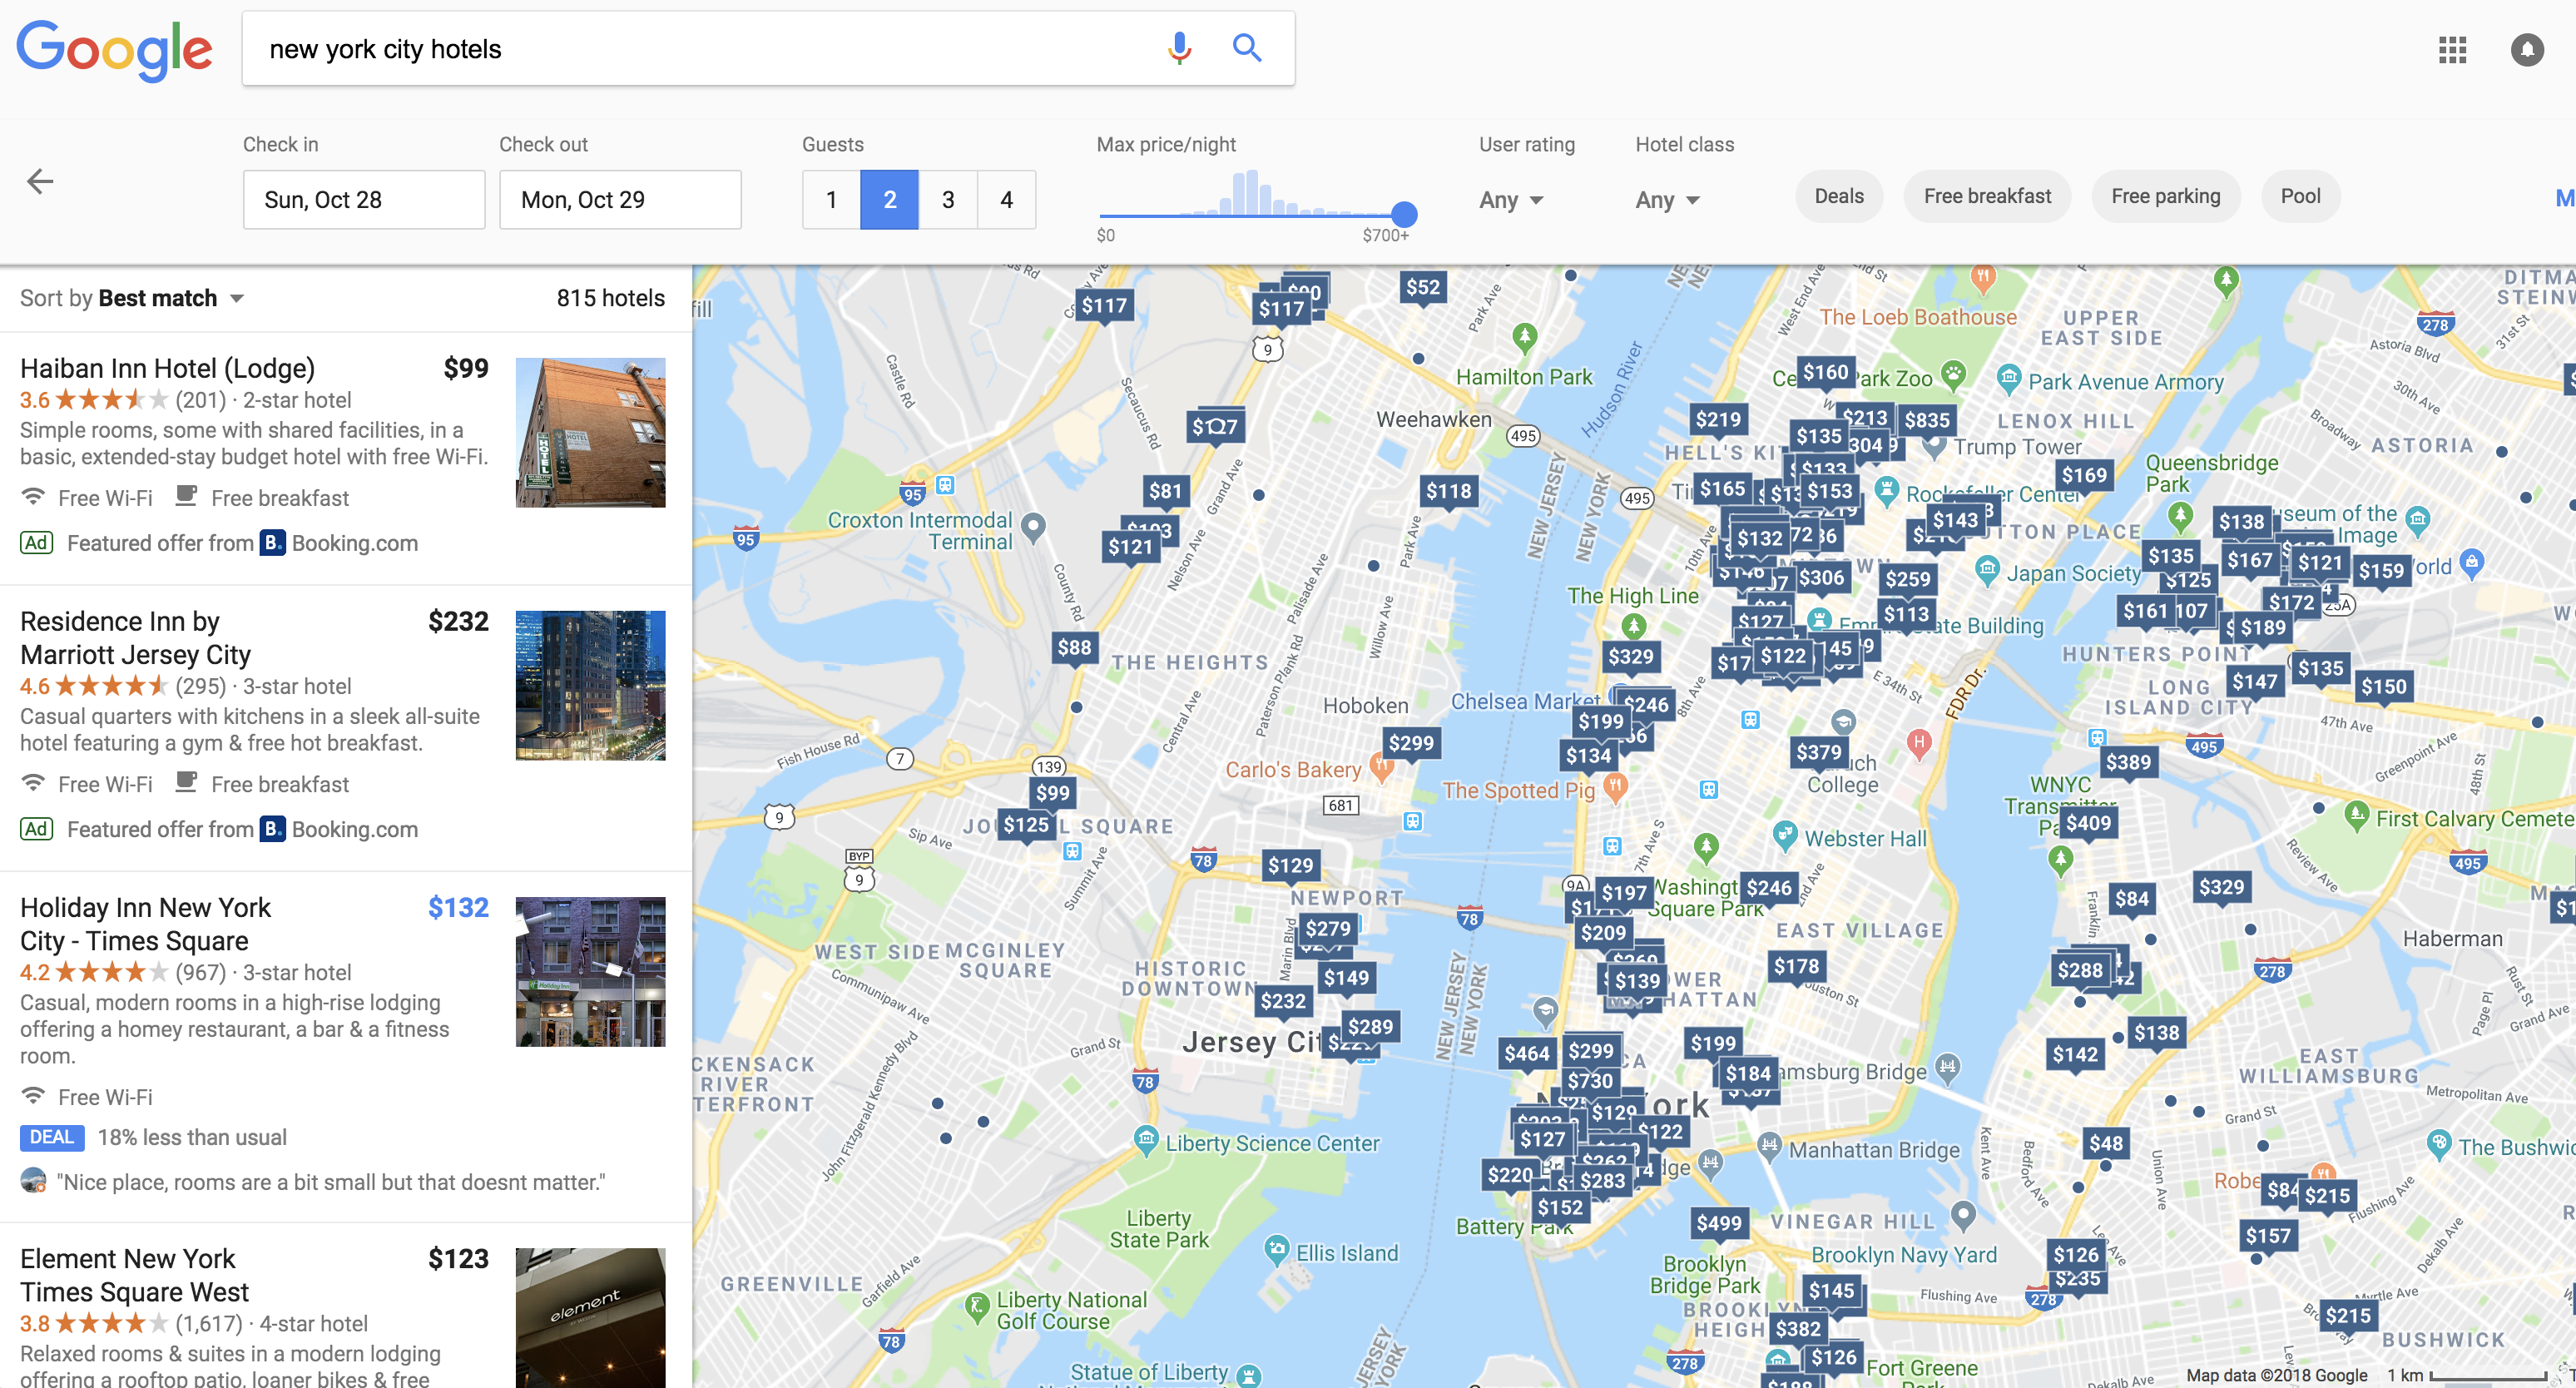 Current Version of Google's Hotel Search on Desktop